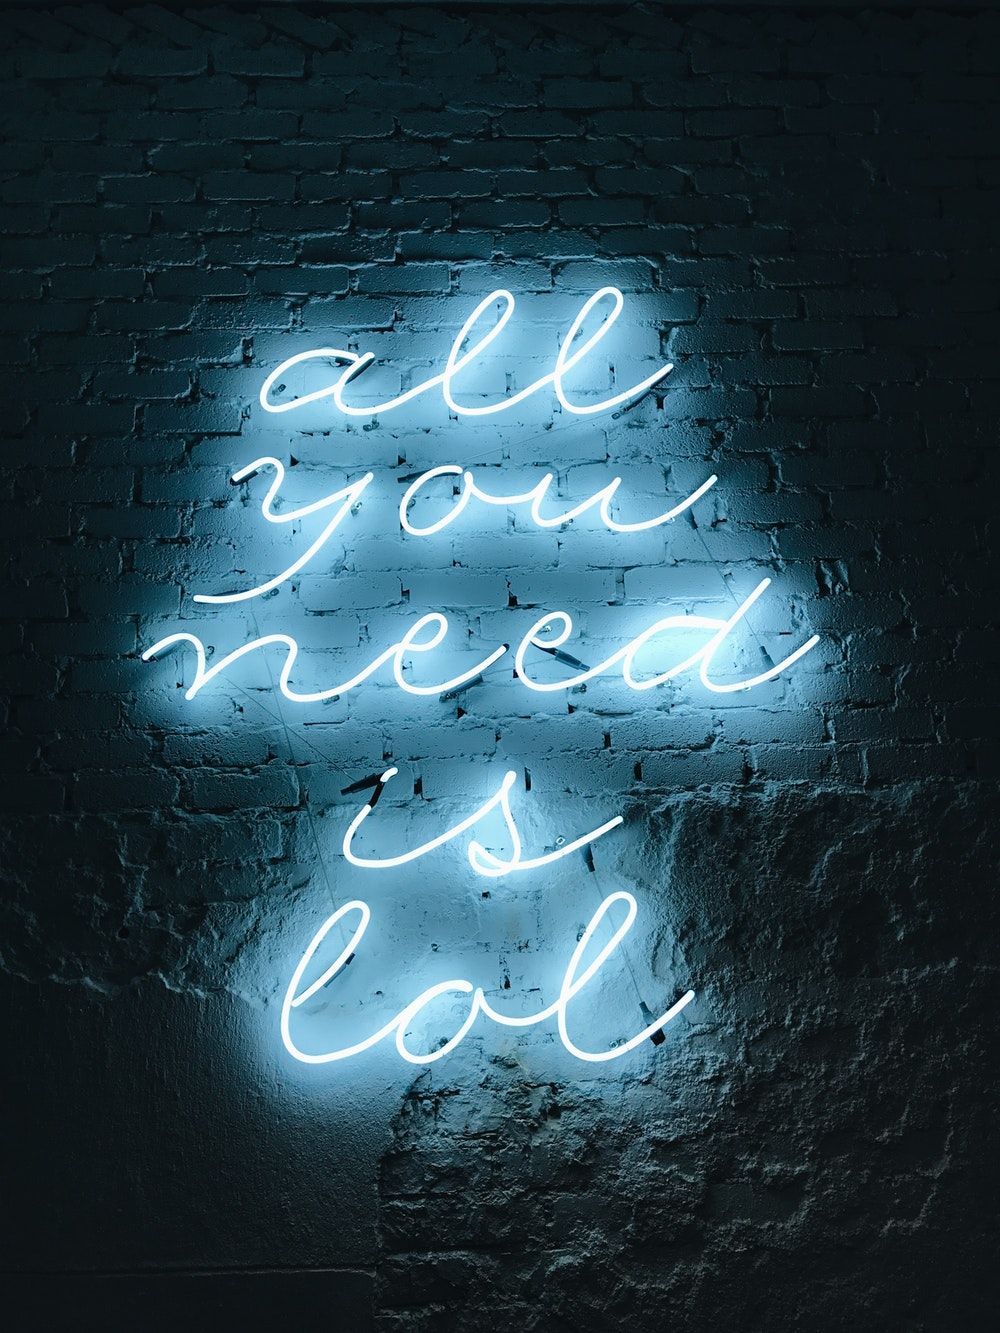 A neon sign that says all you need is lol - Navy blue